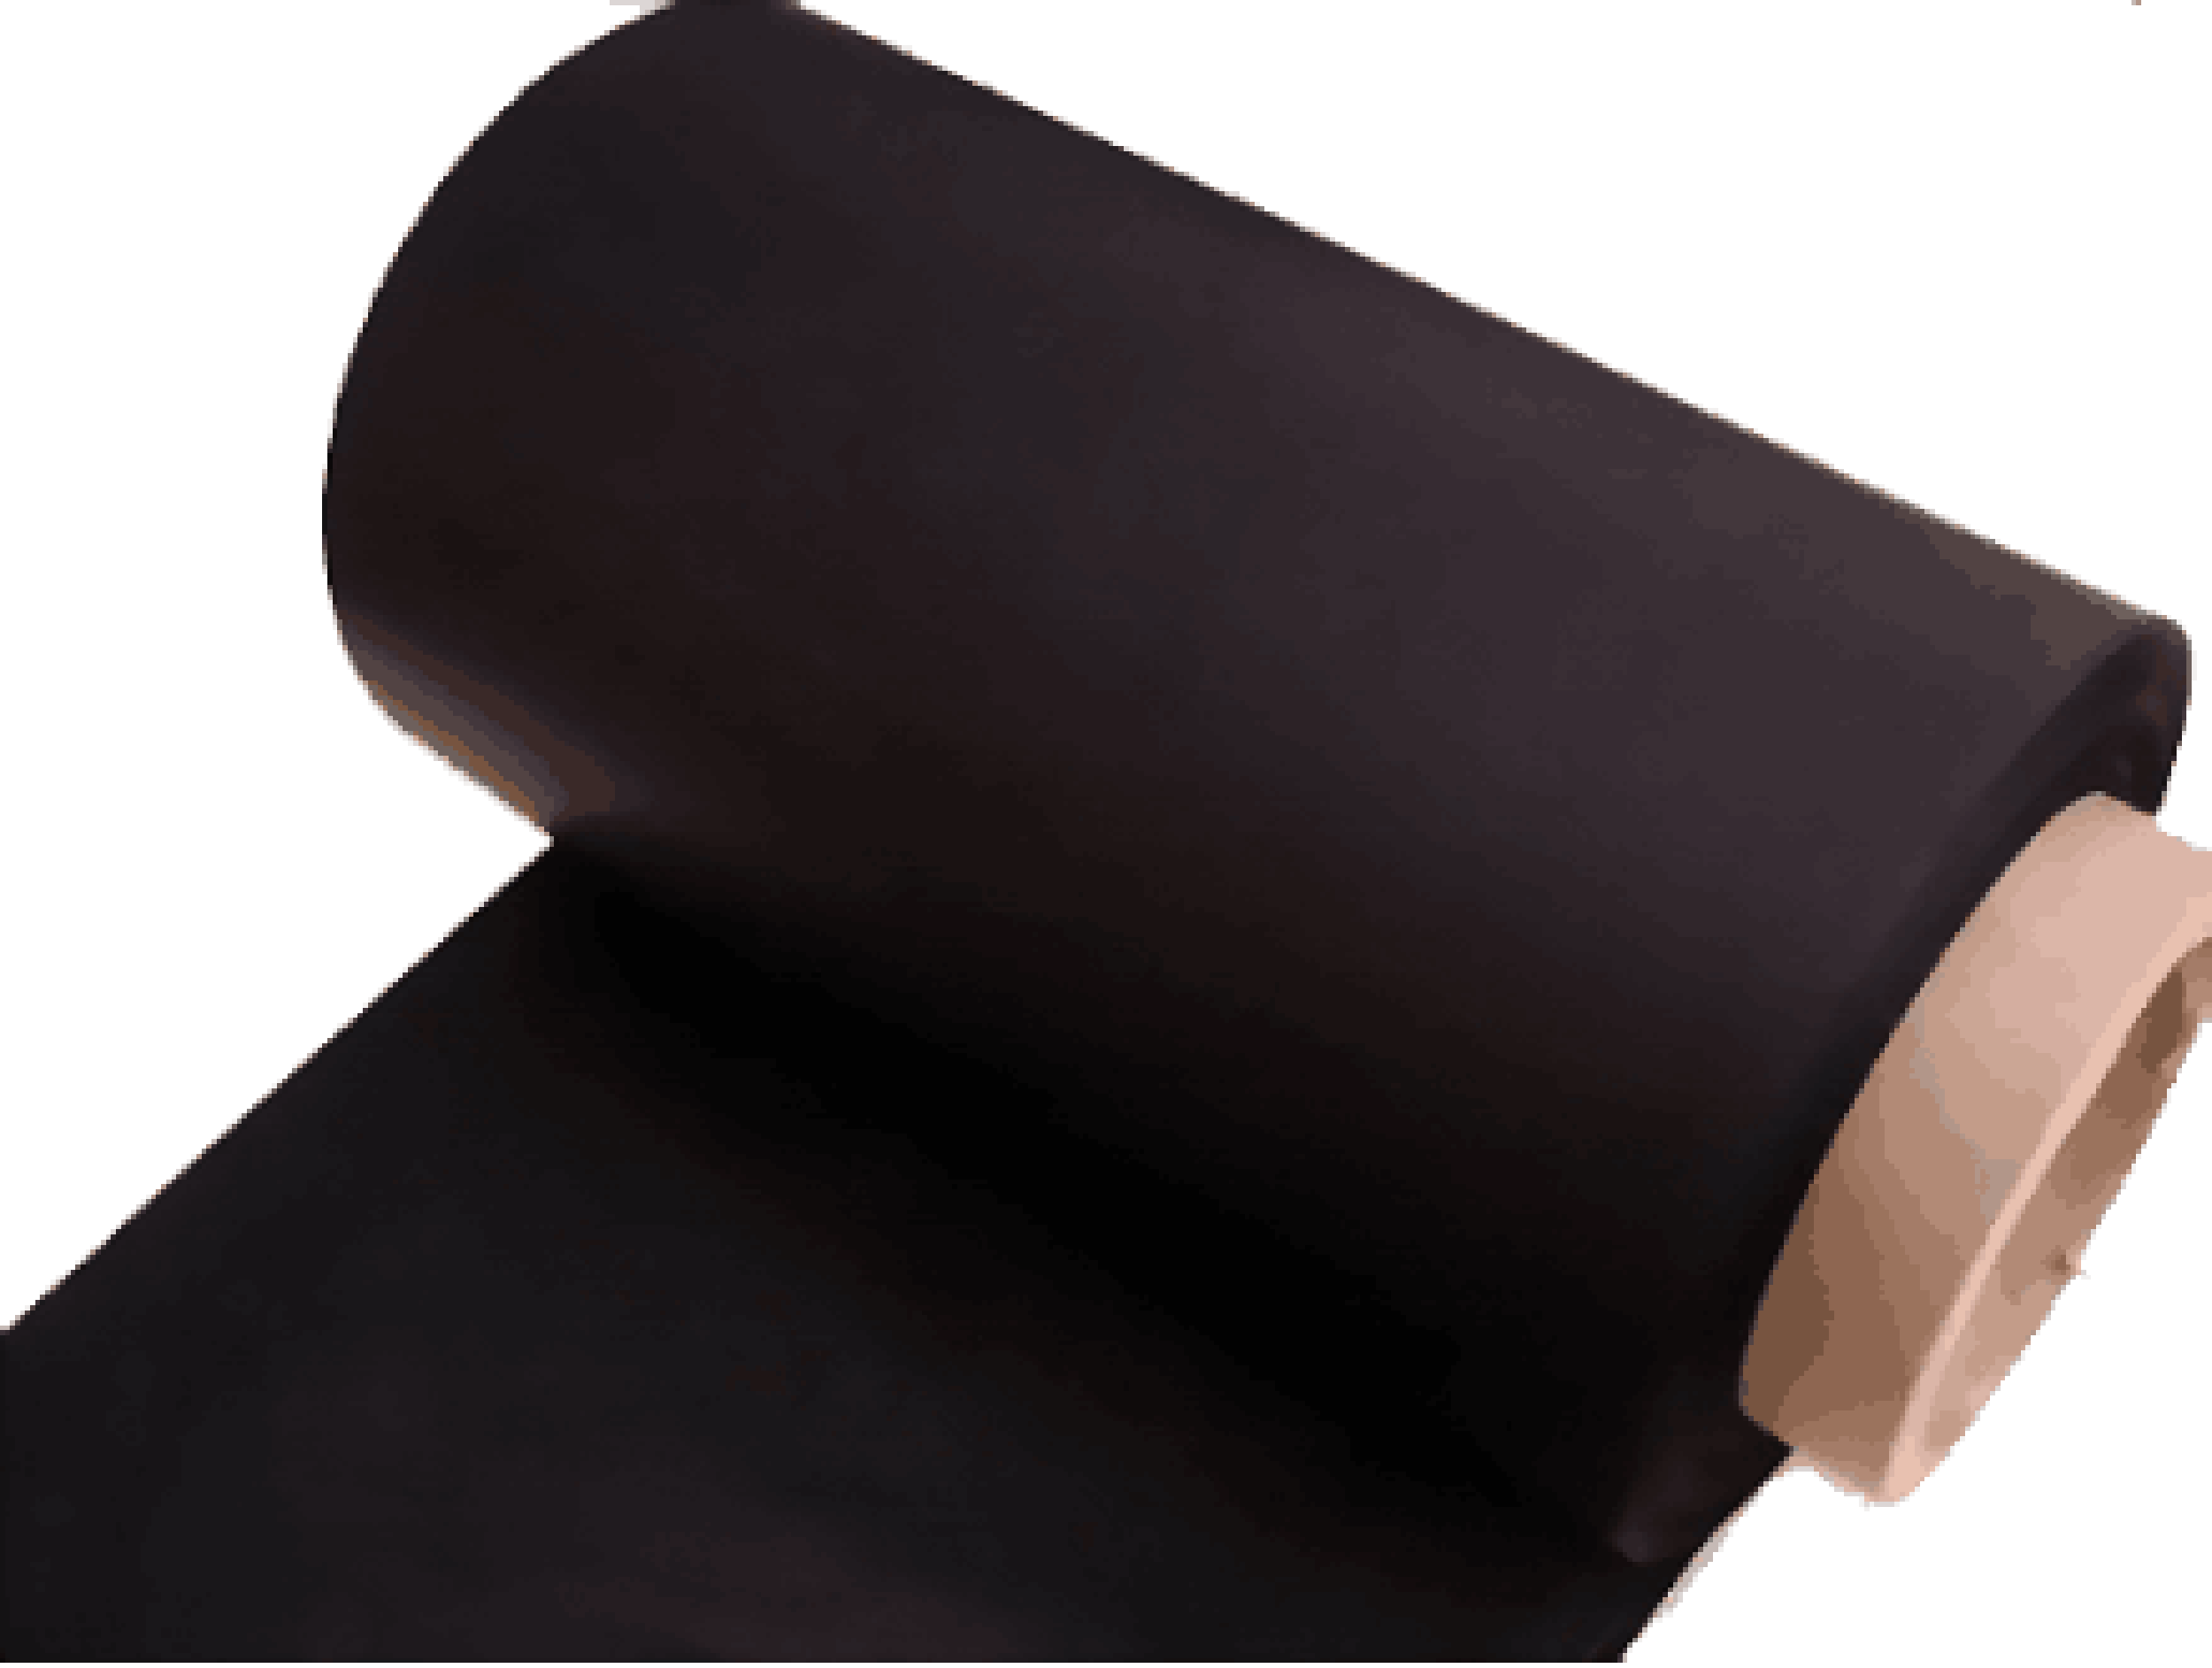 Roll Pu Black carbon conductive film For Ecg